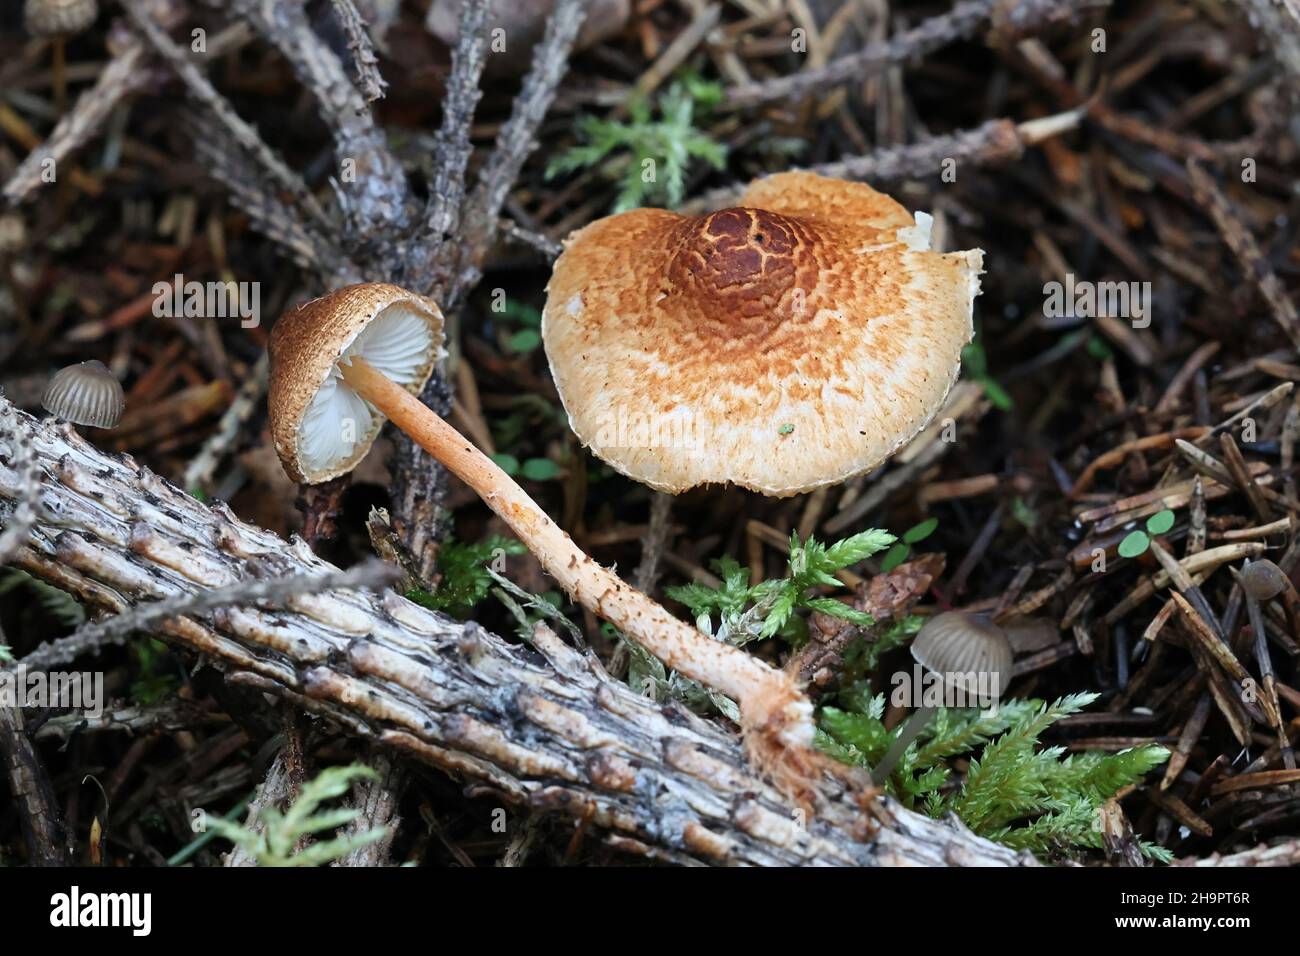 Lepiota castanea, commonly known as the chestnut dapperling, wild poisonous mushroom from Finland Stock Photo